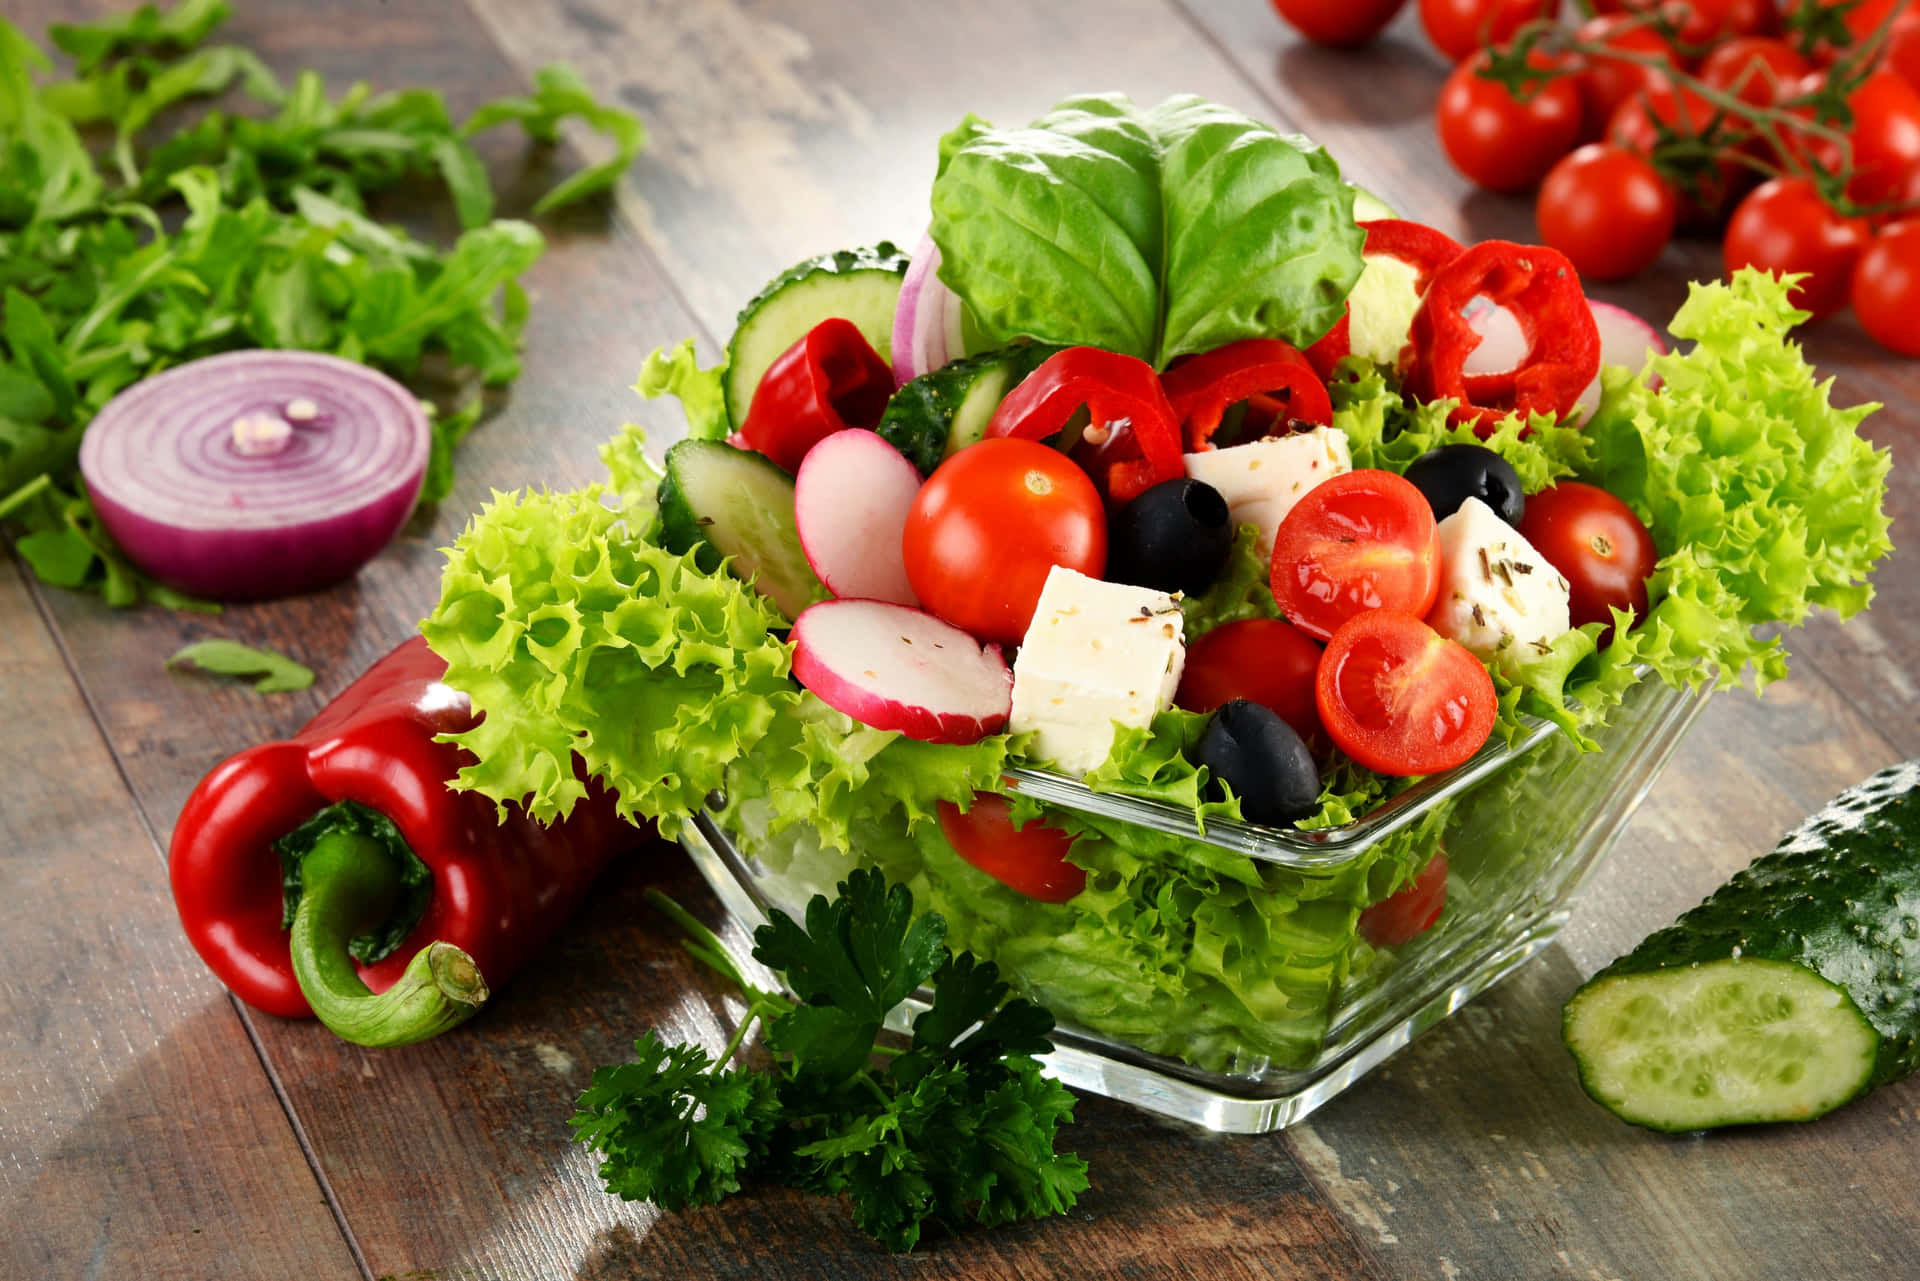 Healthy and colorful salad bowl